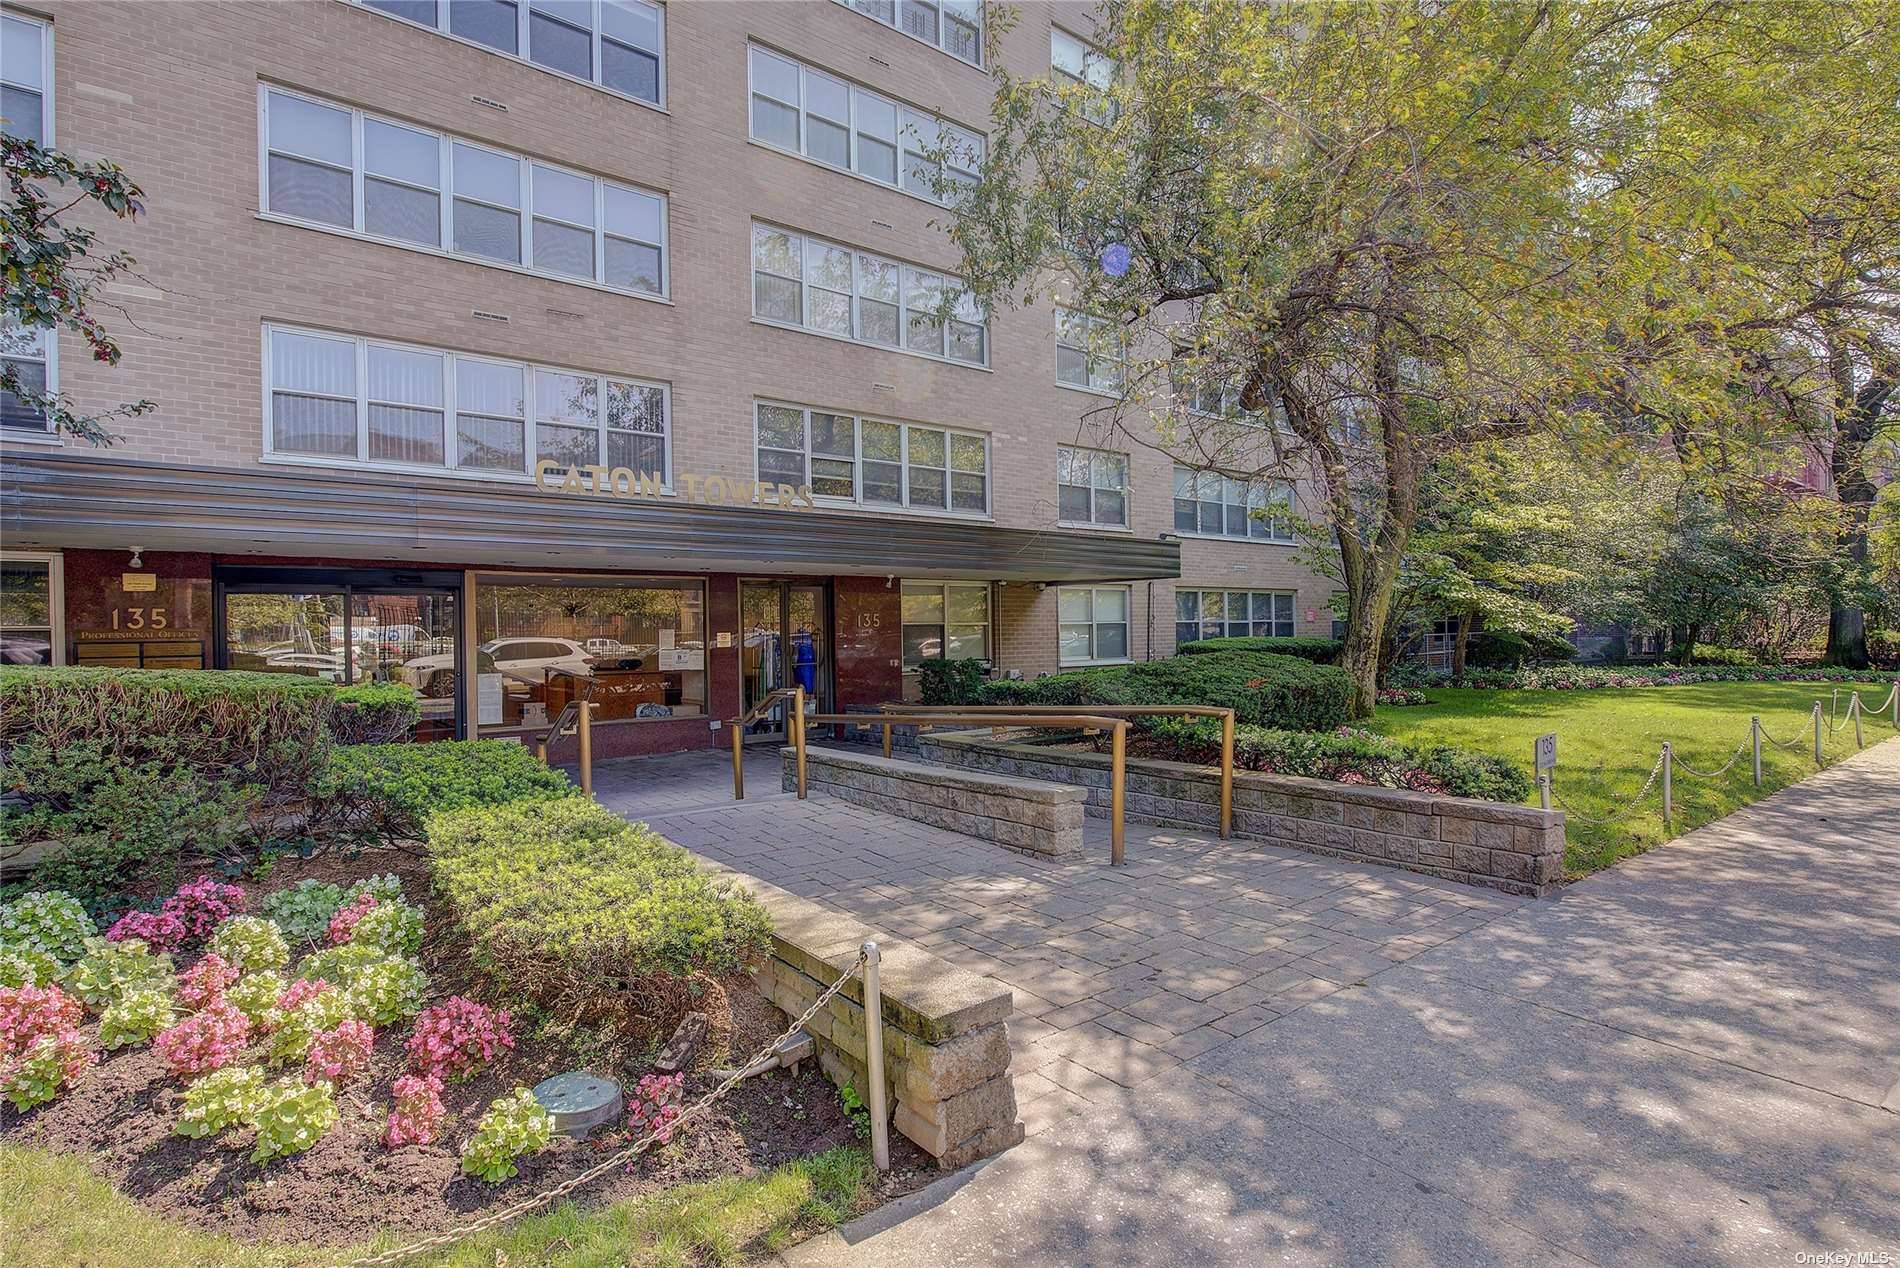 Welcome to 135 Ocean Parkway, Unit S1 1T located in the Kensington area of Brooklyn, NY.